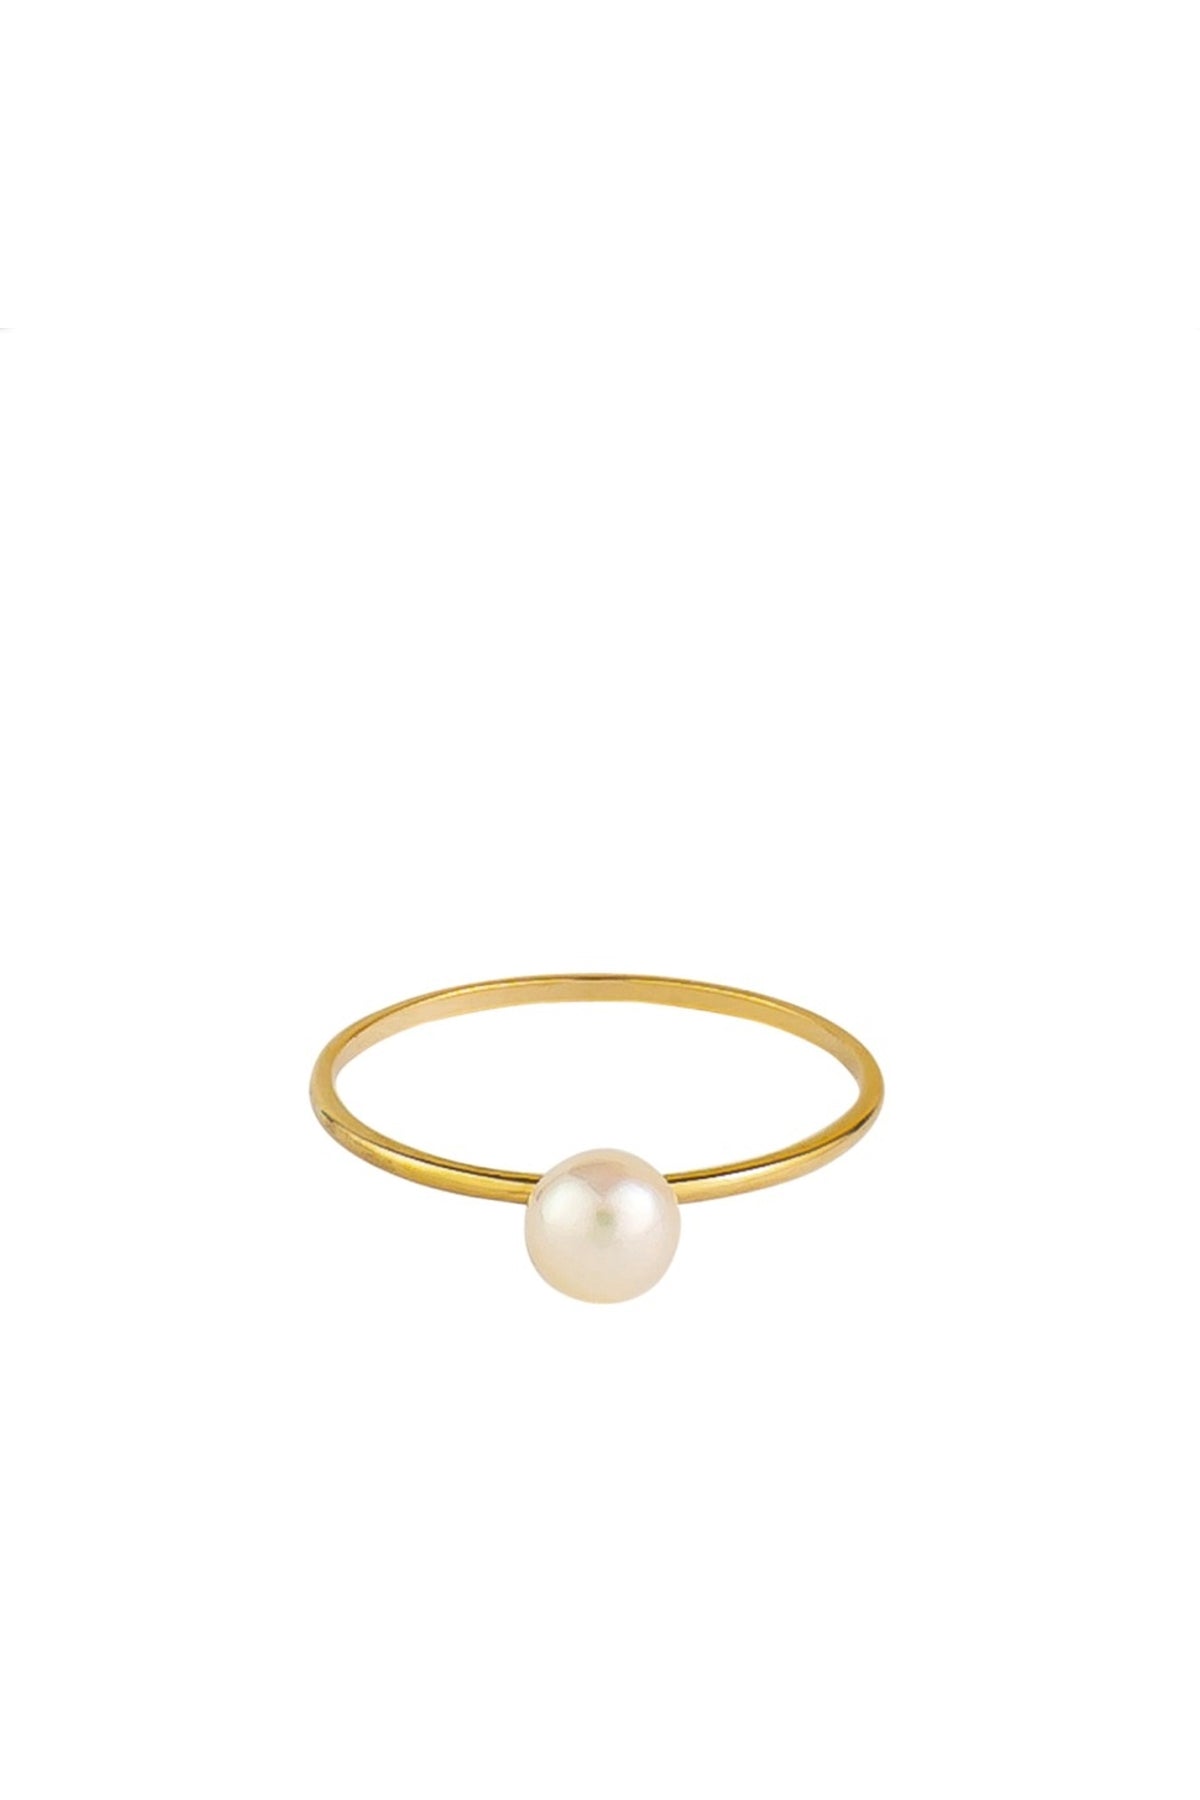 Gold Dainty Single Pearl Ring